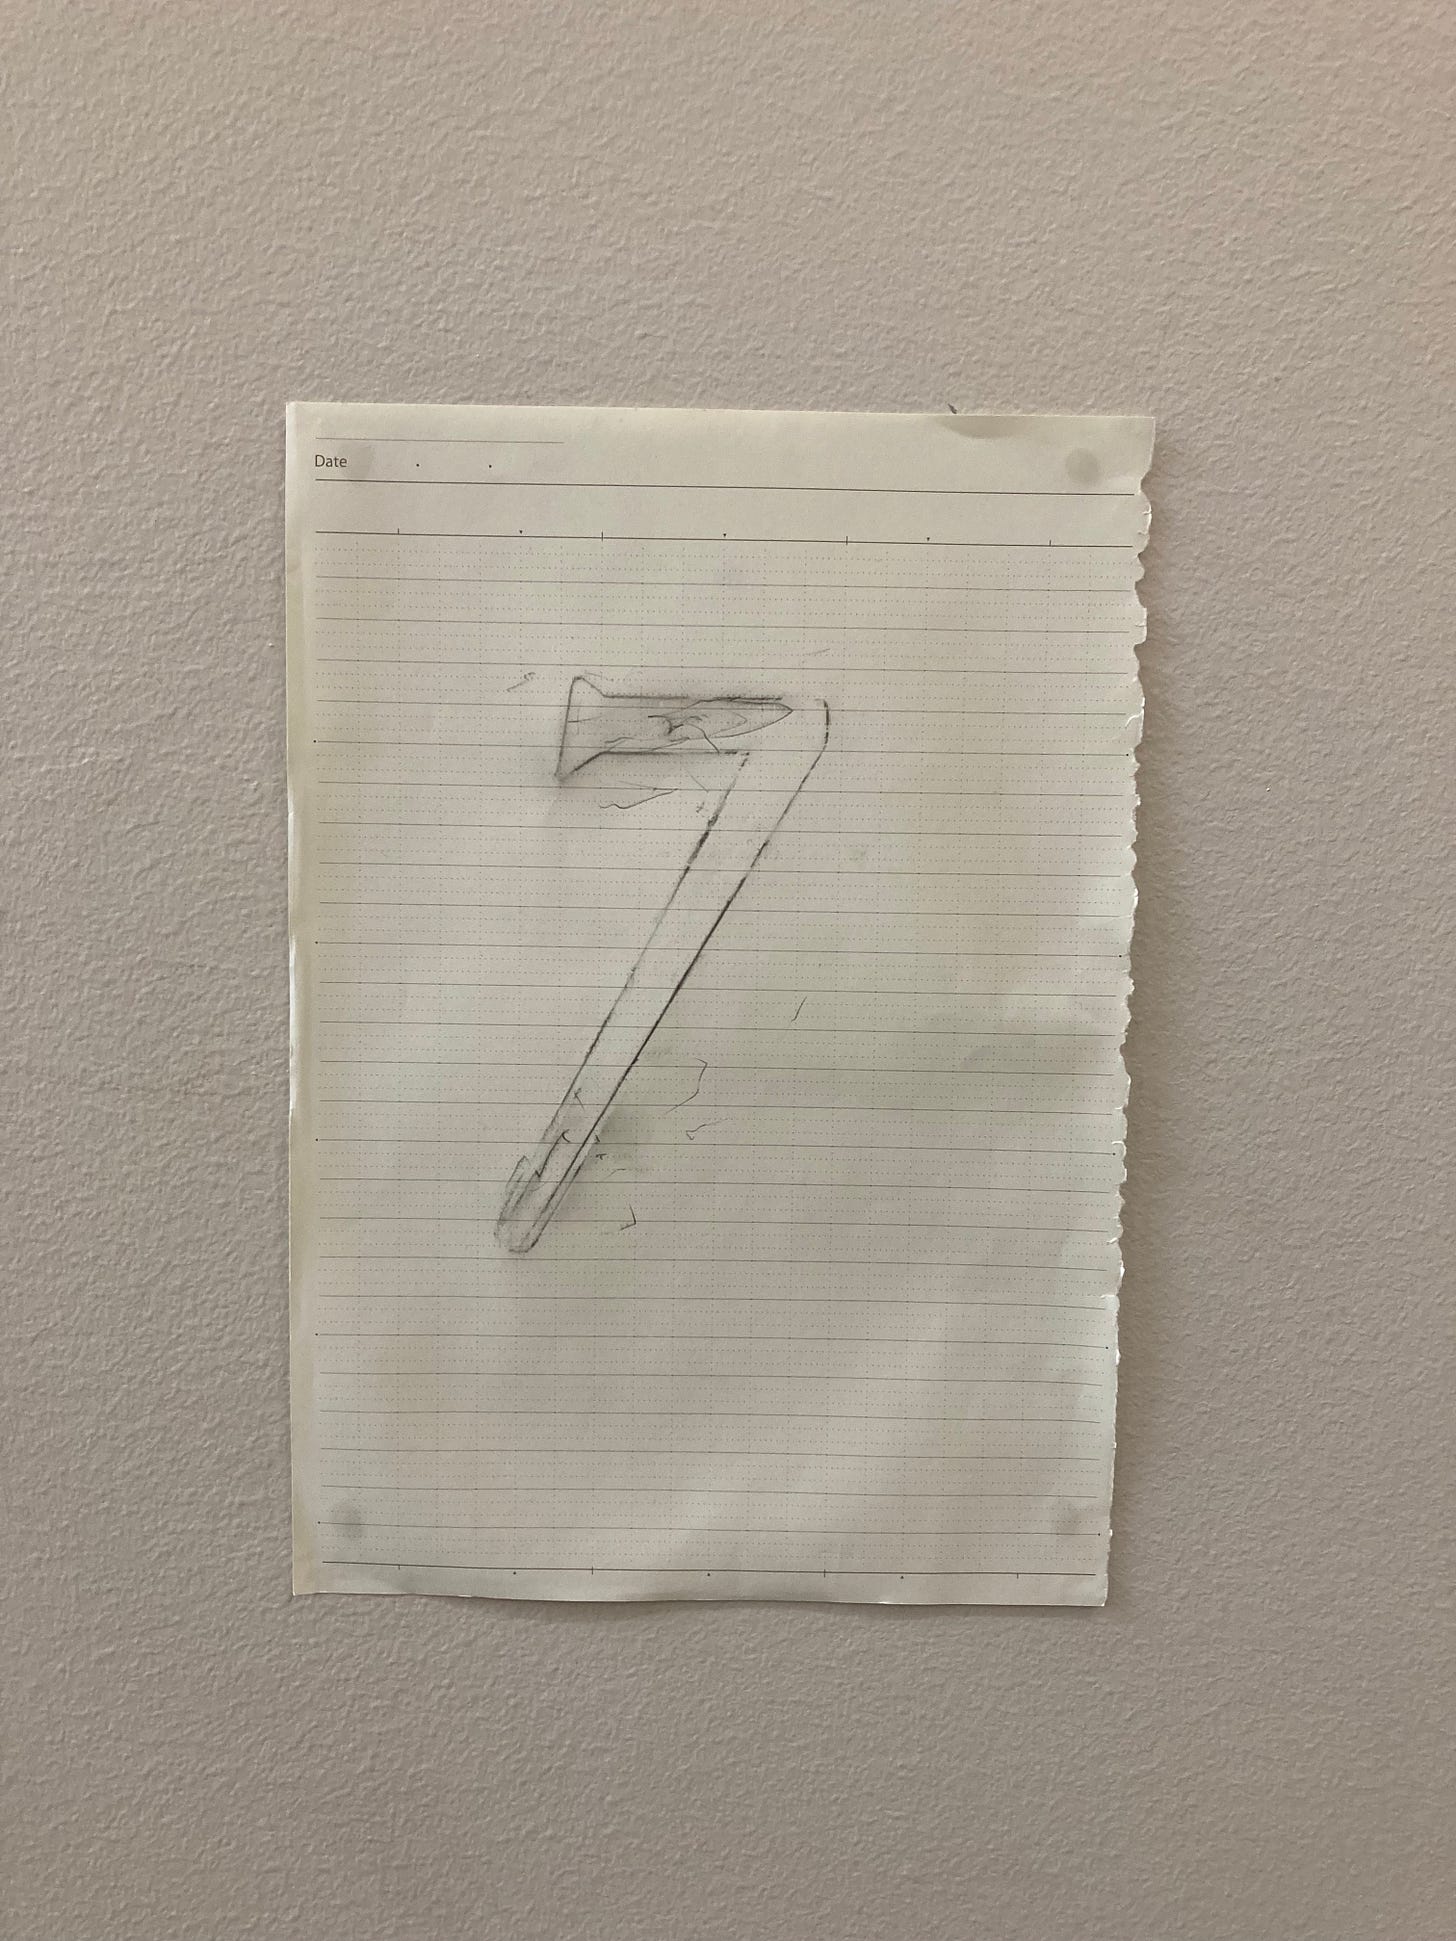 A lined piece of paper with the word "date" in the upper left-hand corner, hangs on a beige wall. The number 7 is outlined in pencil on the paper.